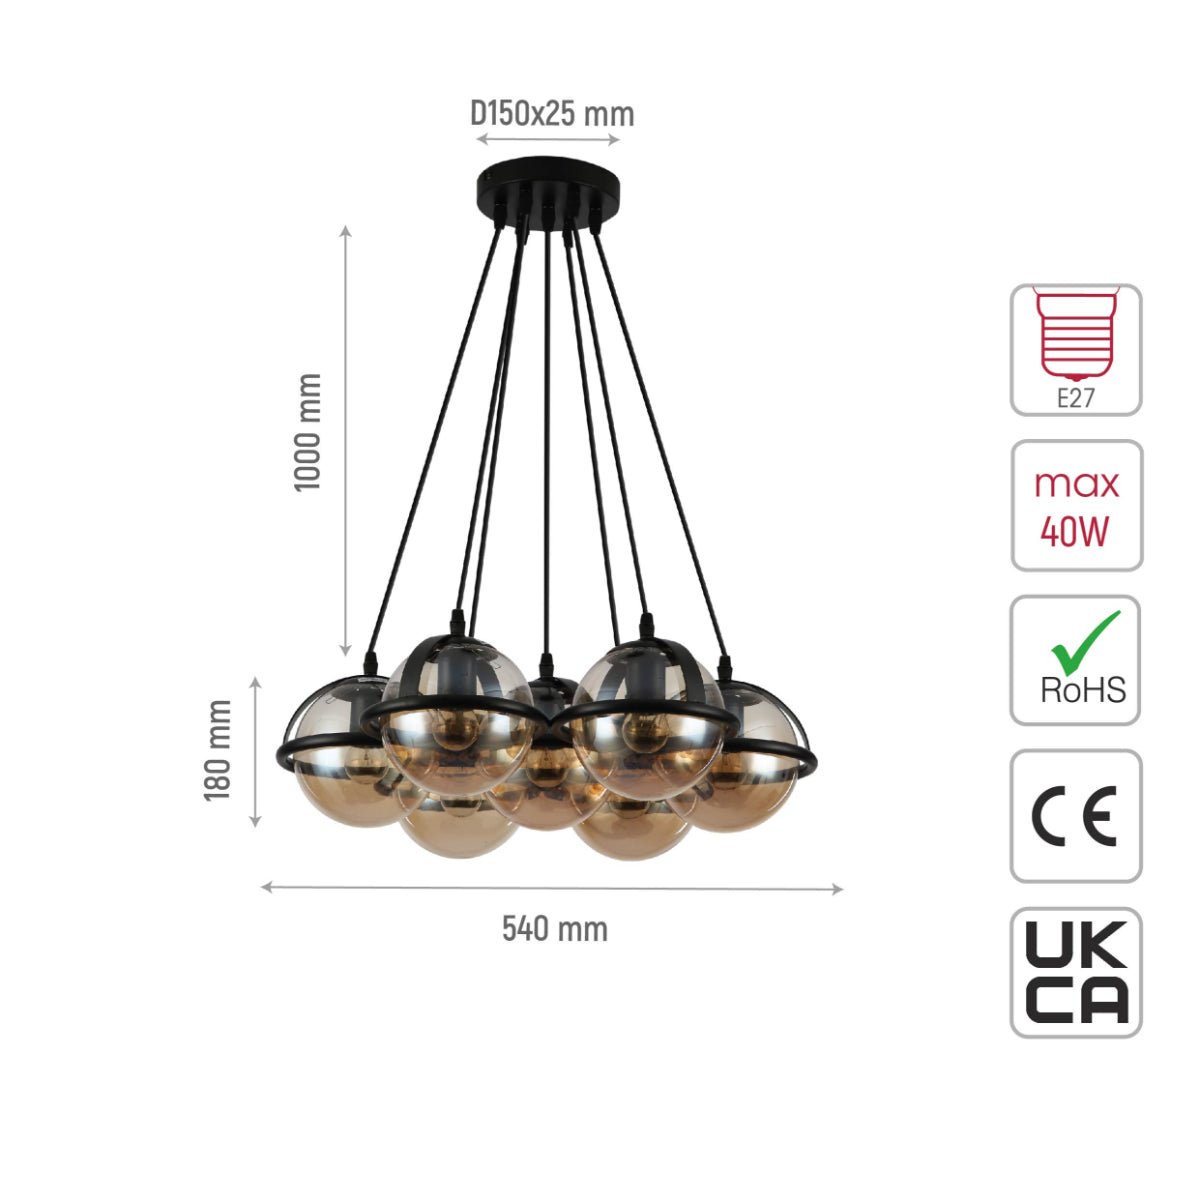 Size and specs of Amber Globe Glasses Daisy Modern Ceiling Light with 7xE27 Fittings | TEKLED 150-18105